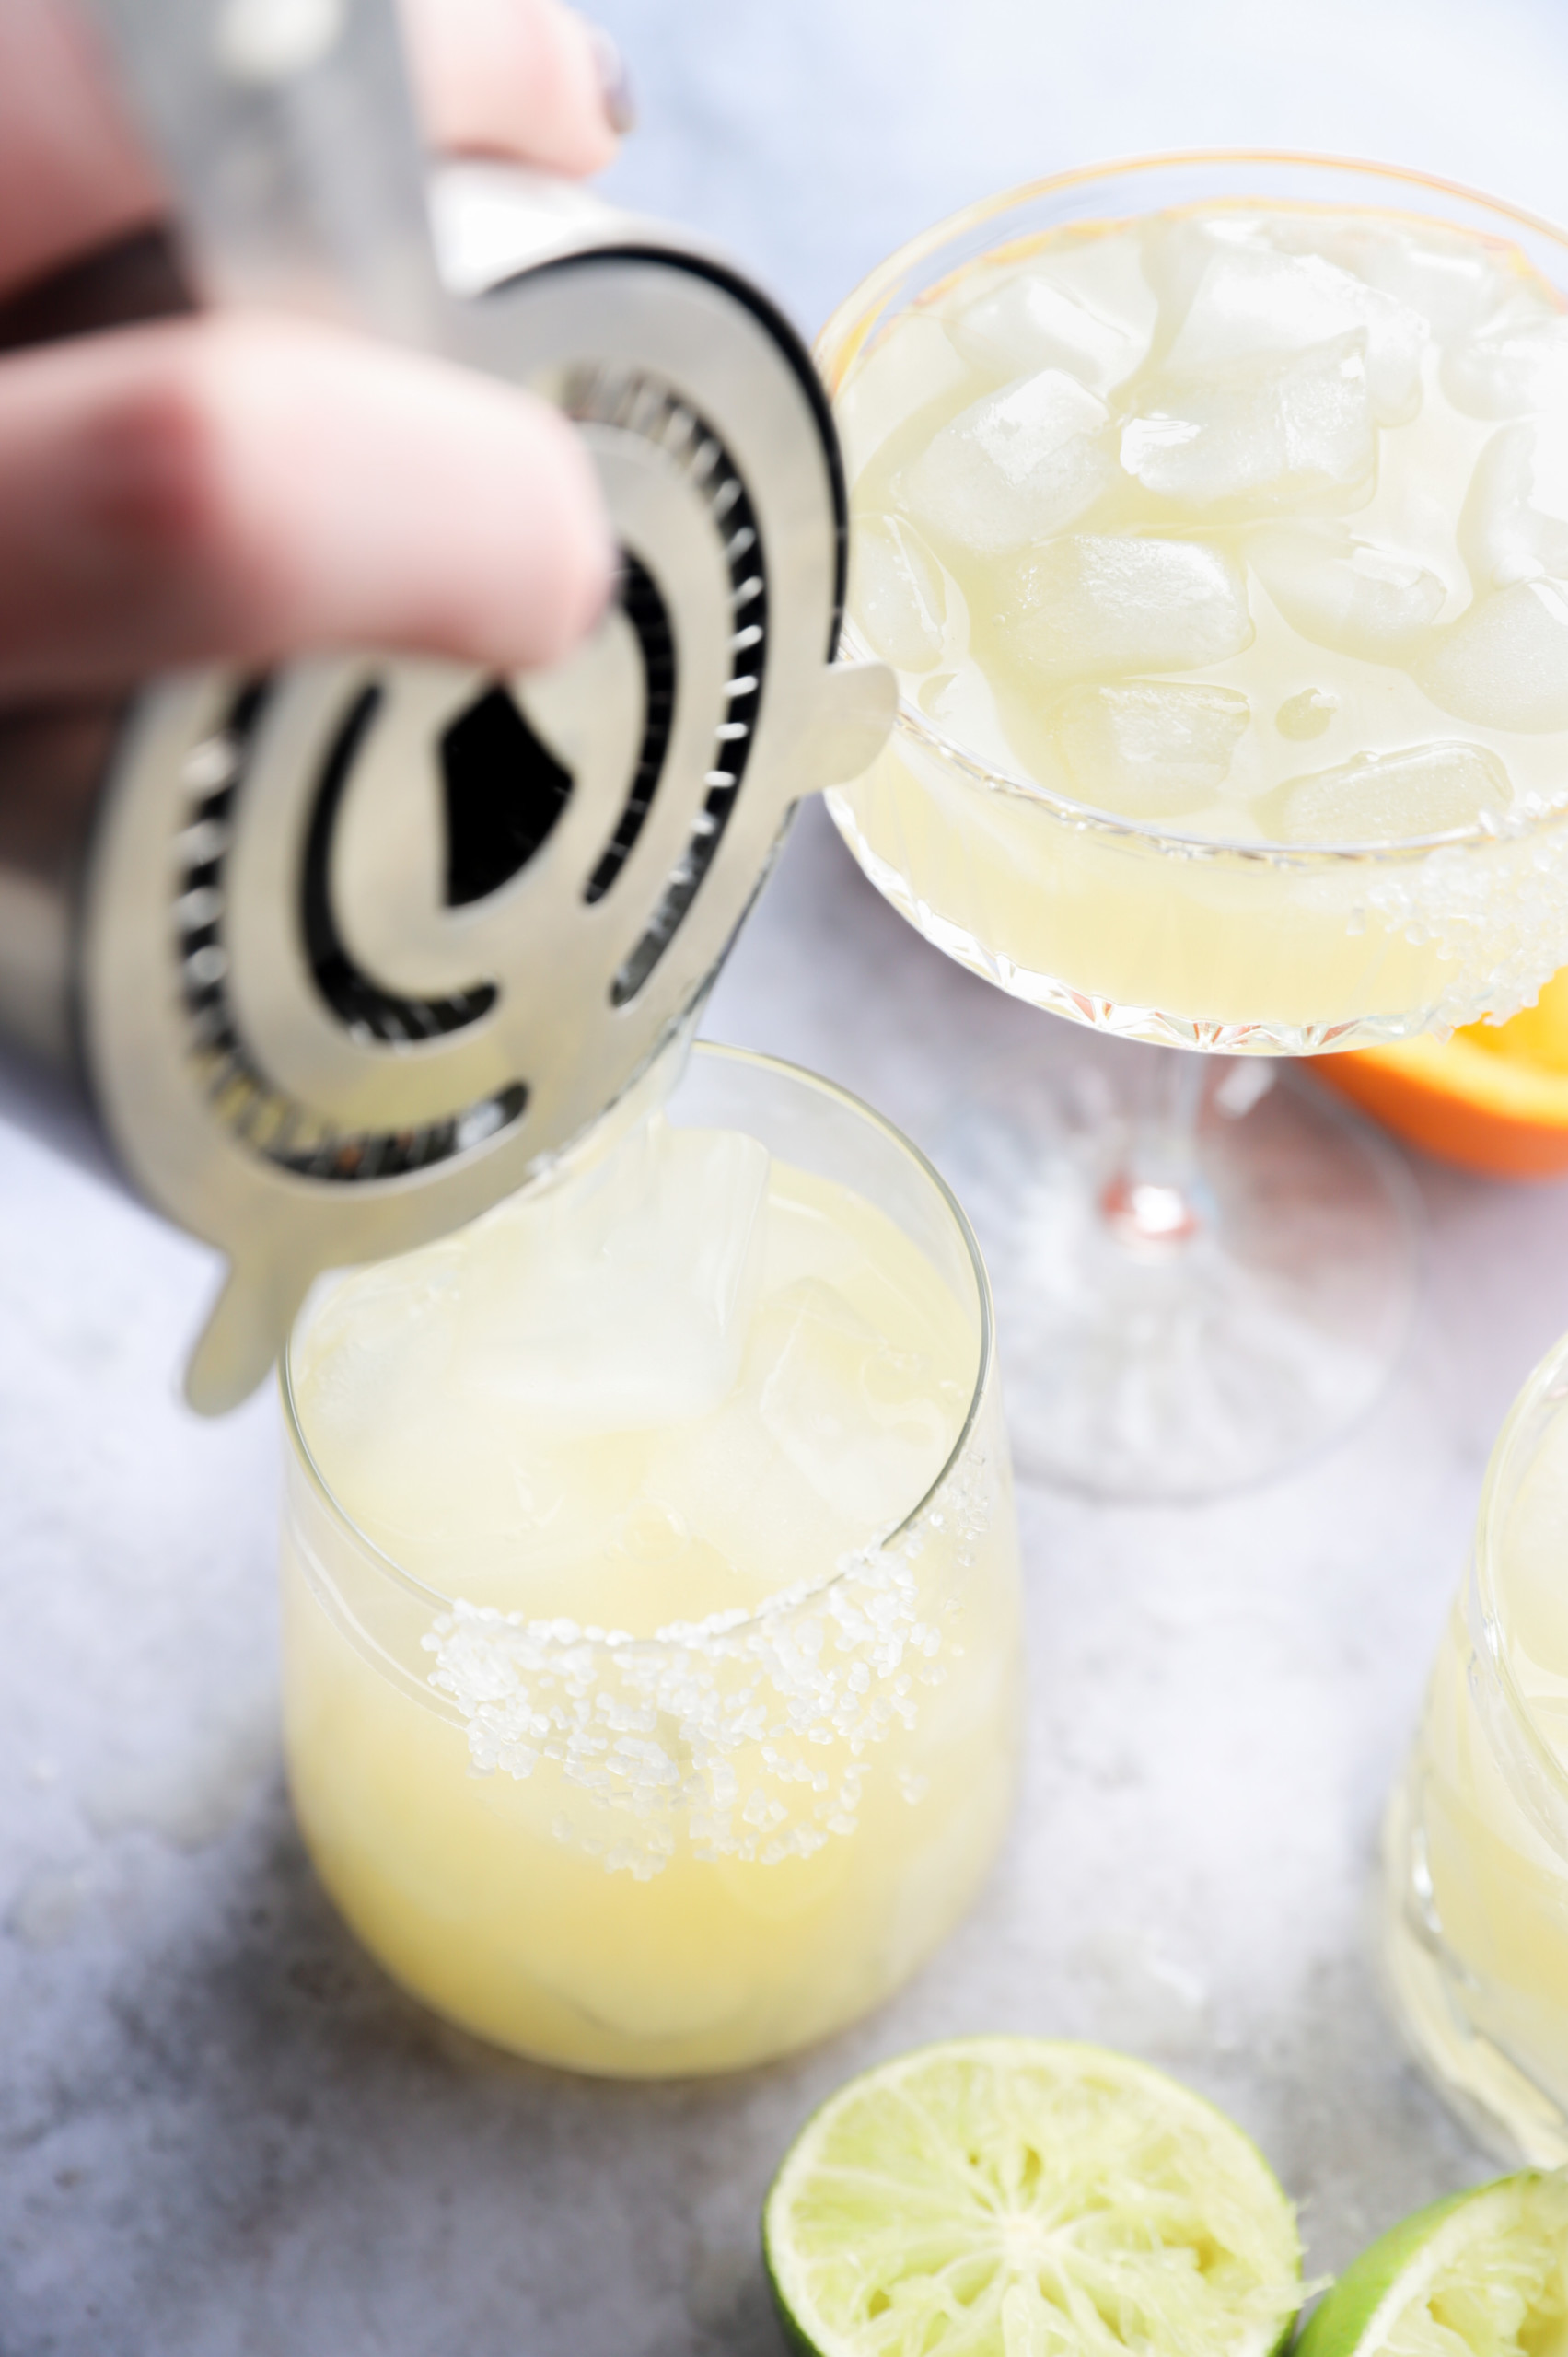 Pouring a tequila cocktail into a rimmed glass picture